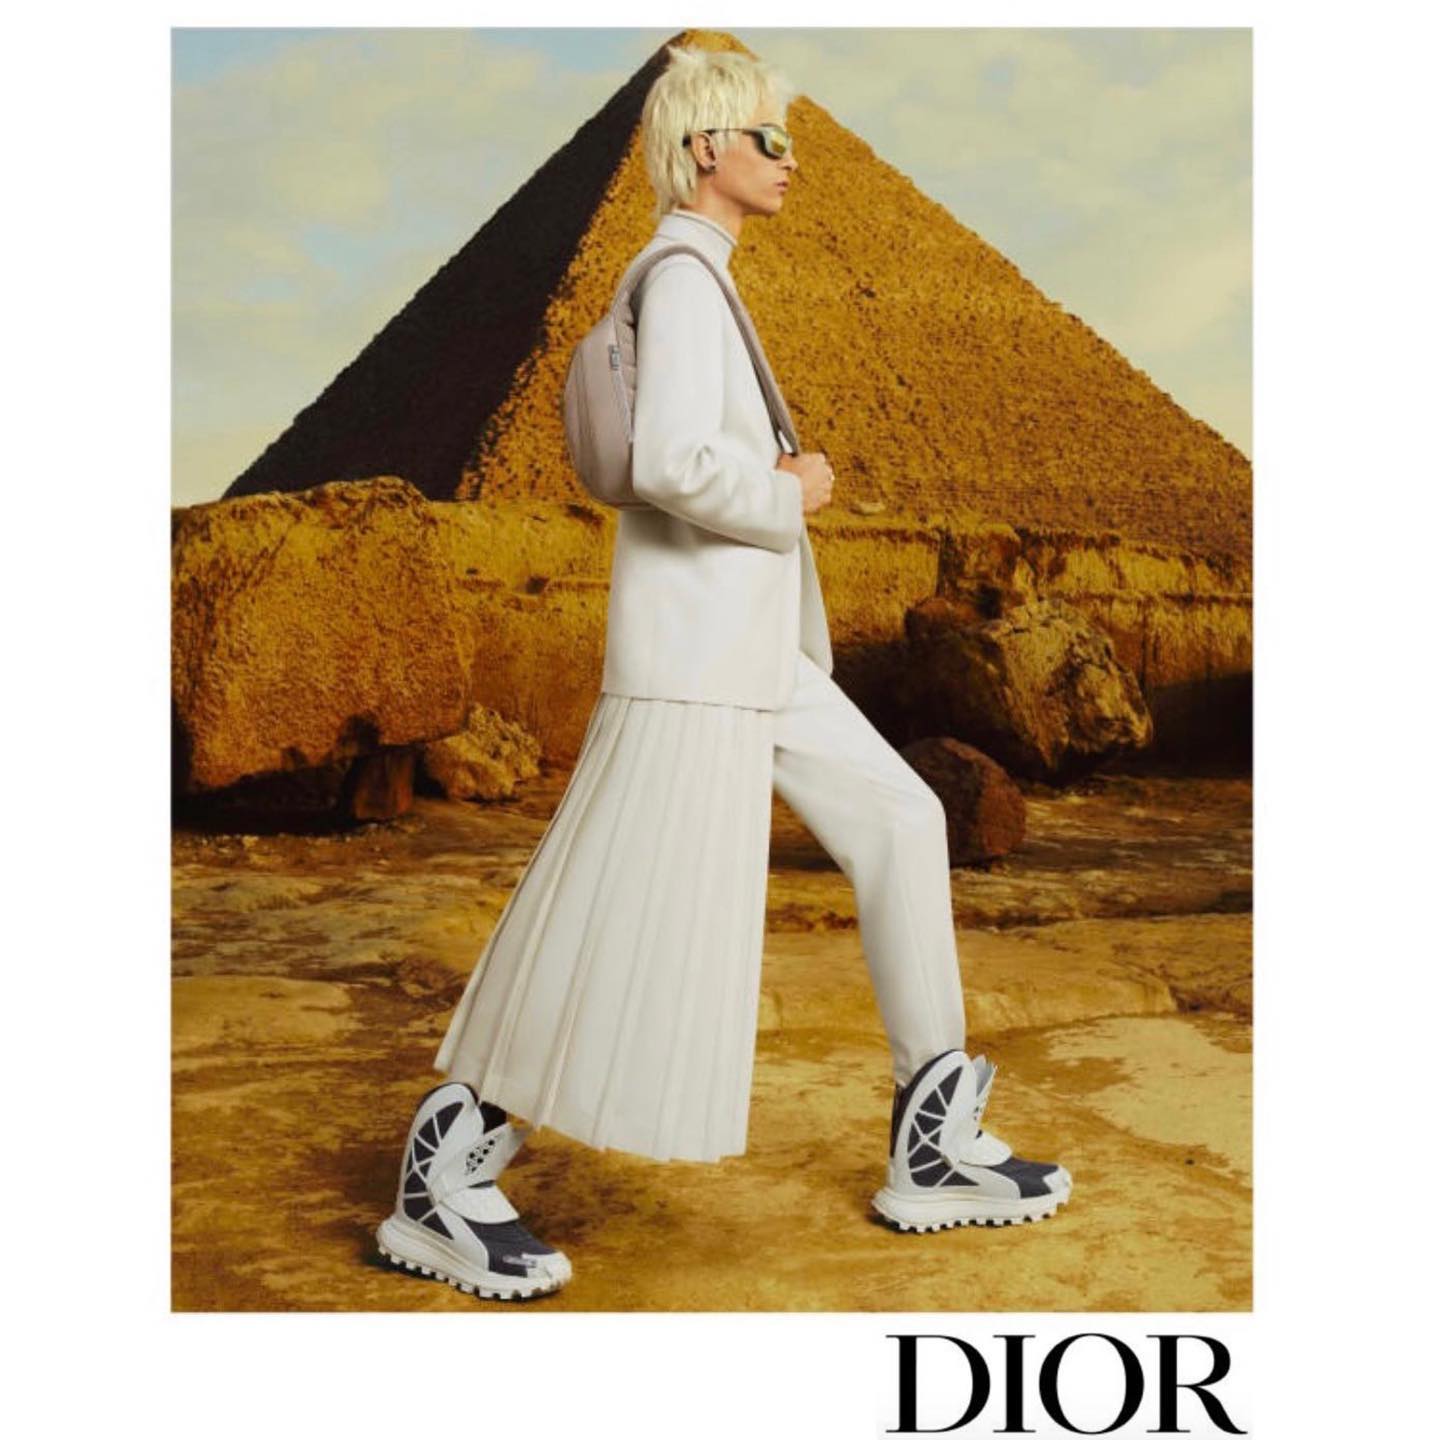 Viktor (@viko63 ) for Dior Pre-Fall 23 Campaign. Photography by Rafael Pavarotti, styling by Melanie Ward and Ellie Grace Cumming, hair by Guido Palau, make-up by Peter Philips, casting by Shelley Durkan.